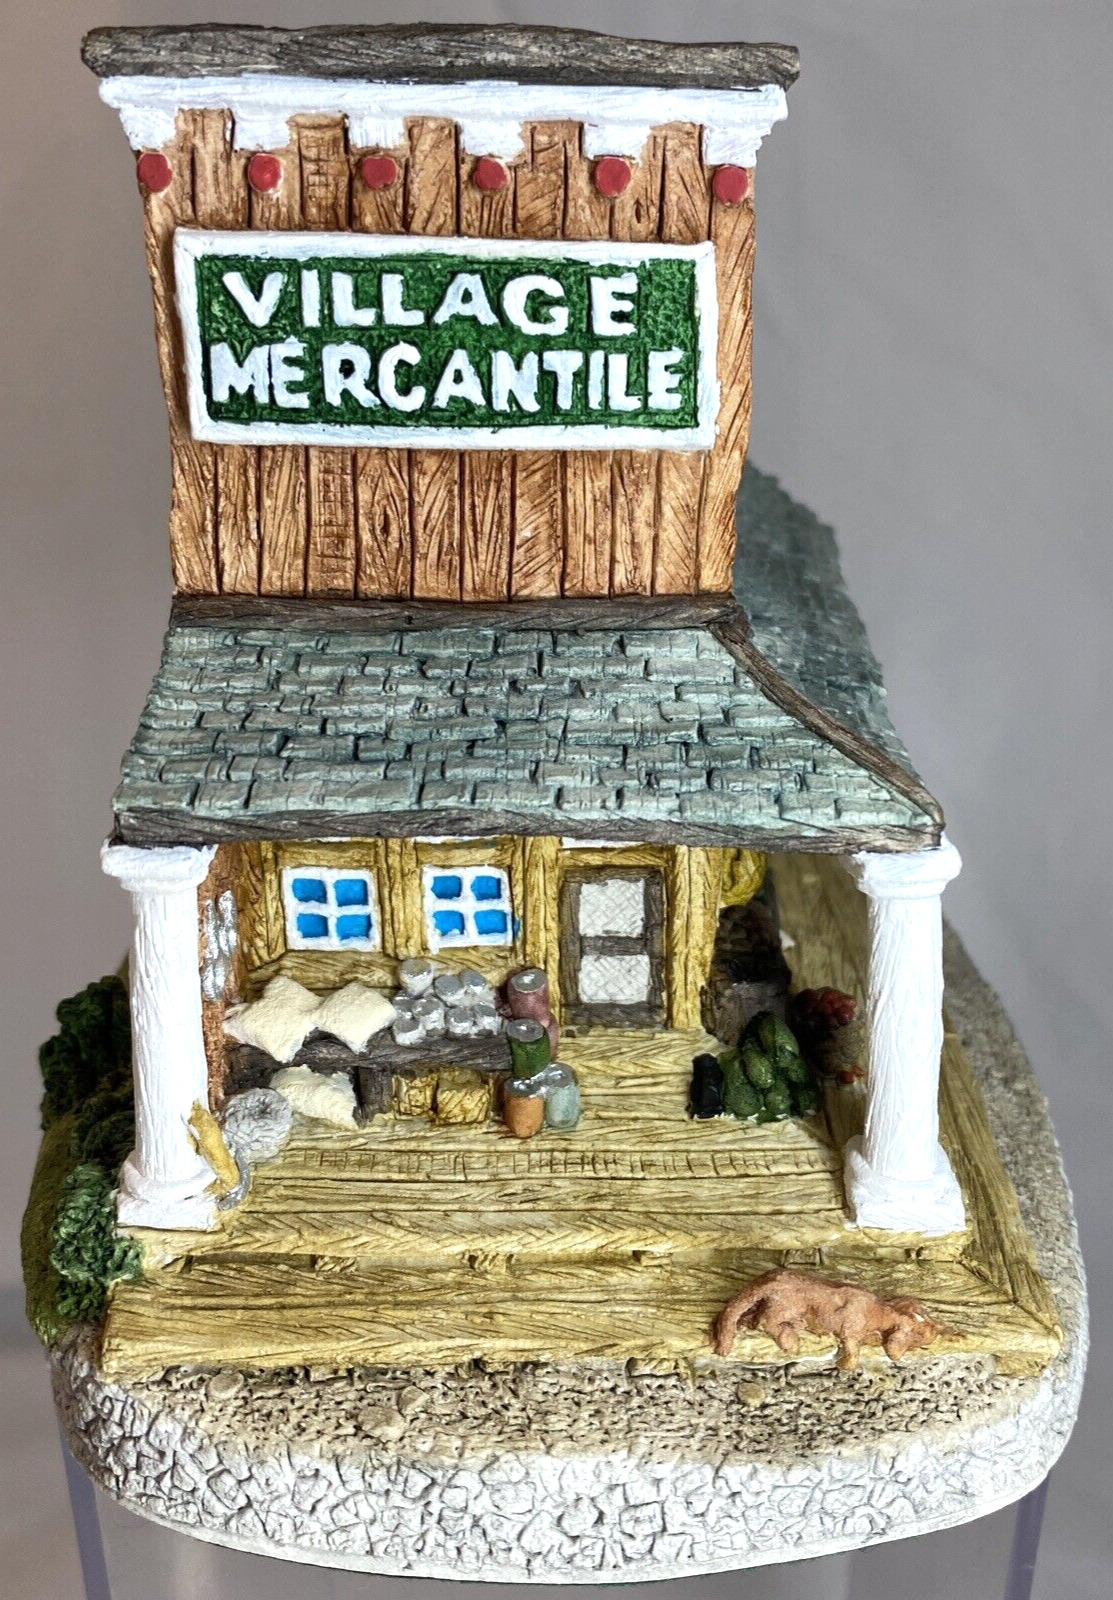 Signed Maurice Wideman “Village Mercantile” 420A- AC-048-1991 Boxed